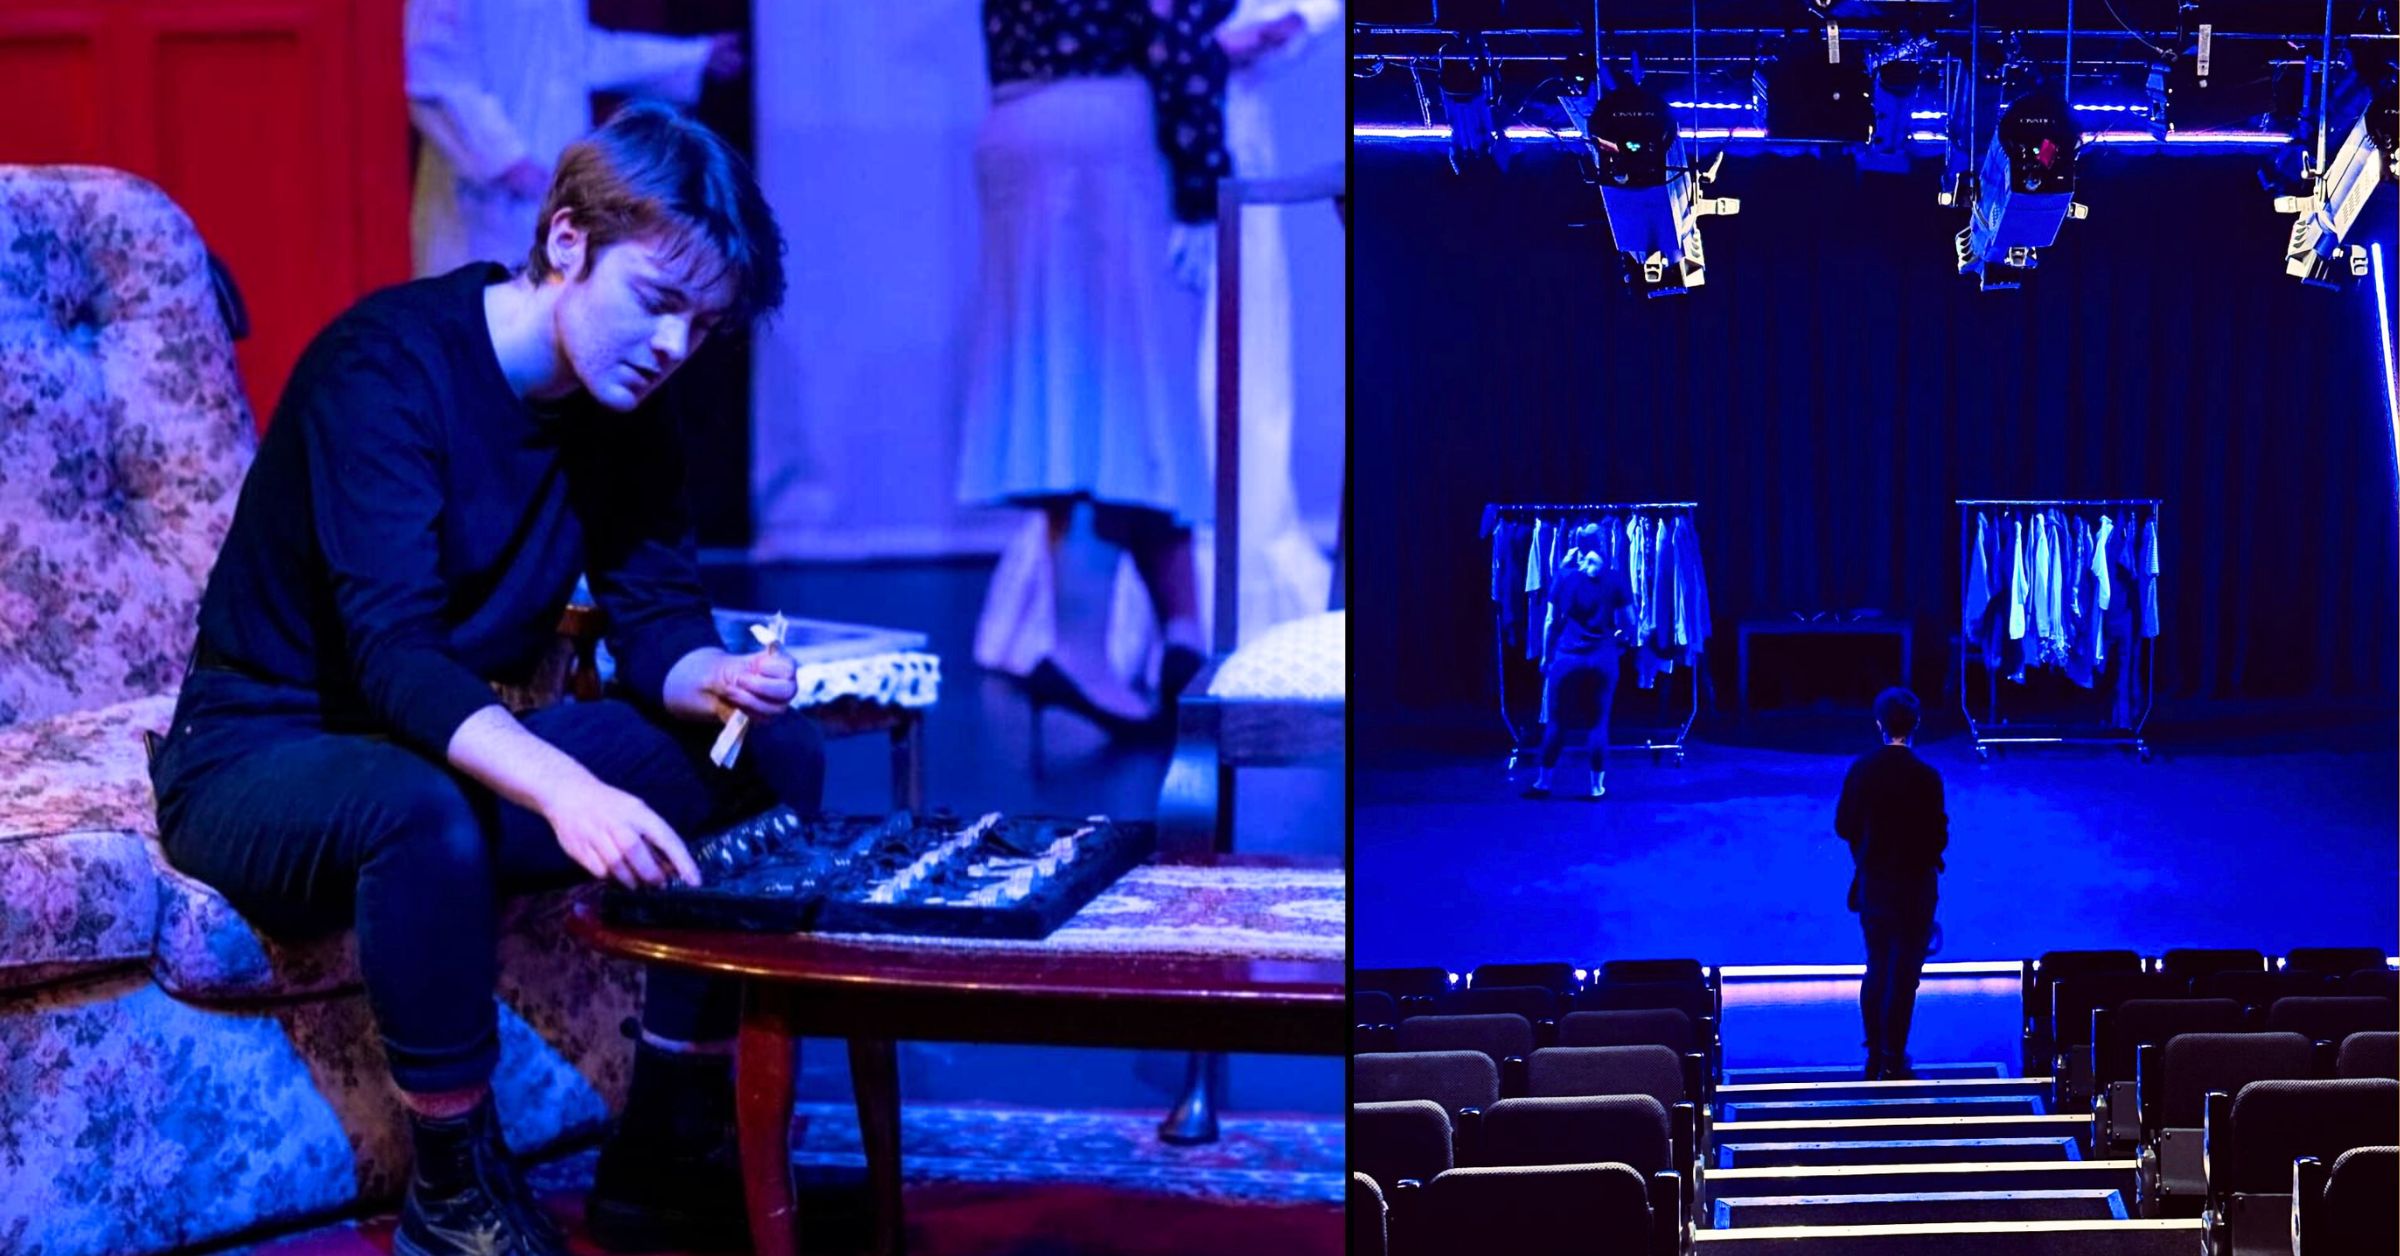 Two photographs of a young masculine presenting person with fair skin and light brown hair. The lighting is very blue. On the left they are sitting on an old couch, focussed on a task on a coffee table in front of them. Contextually this may be part of a theatre set. On the left they are standing in front of an empty stage with the lighting grid and empty chairs for the audience visible around them.